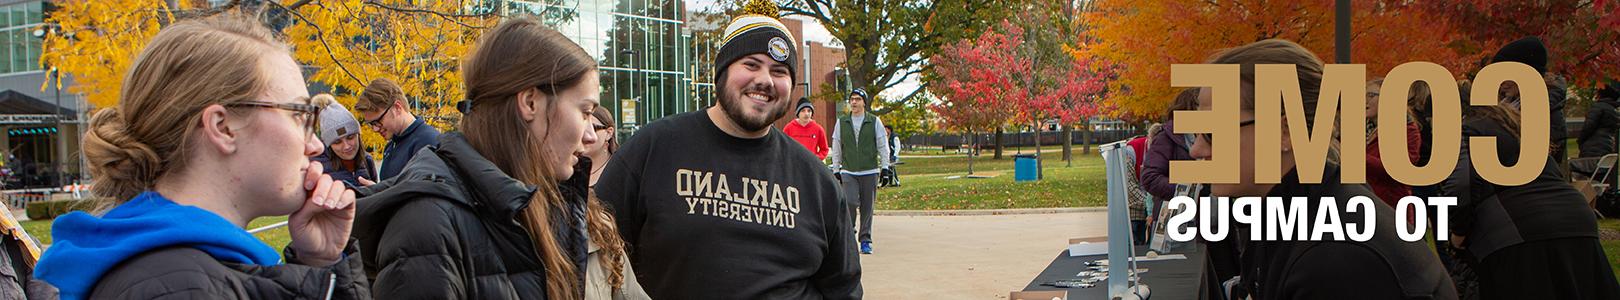 Students wearing "Oakland University" gear outside on campus, with text that reads "Come to Campus" on the left side